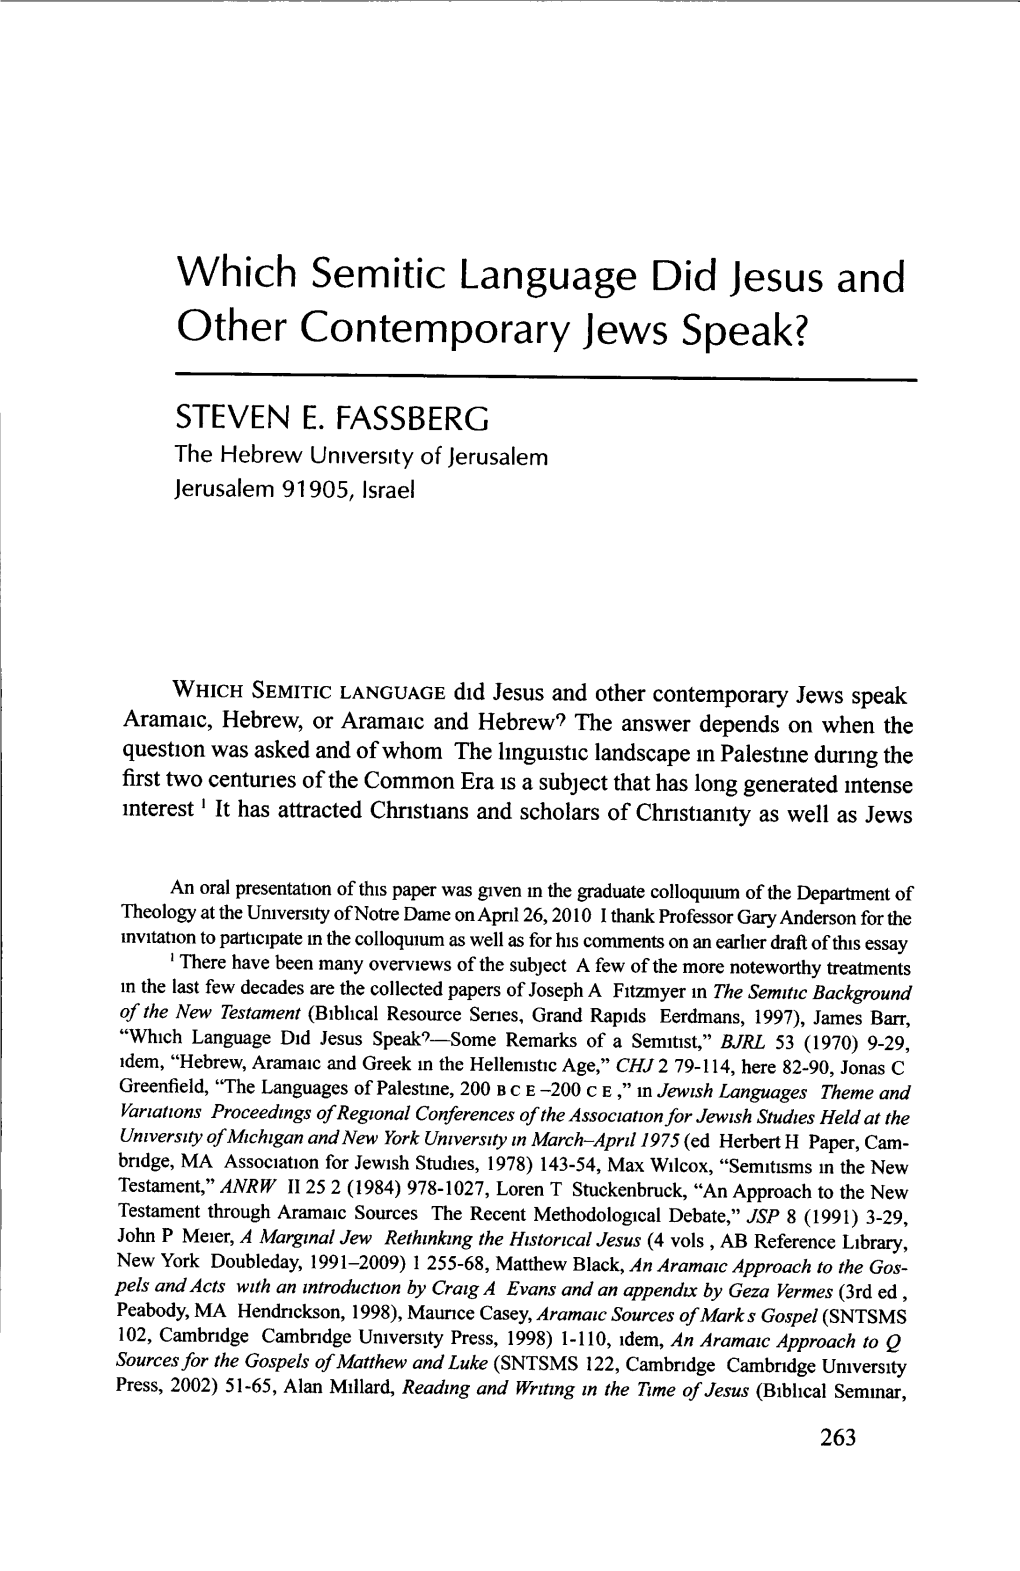 Which Semitic Language Did Jesus and Other Contemporary Jews Speak?